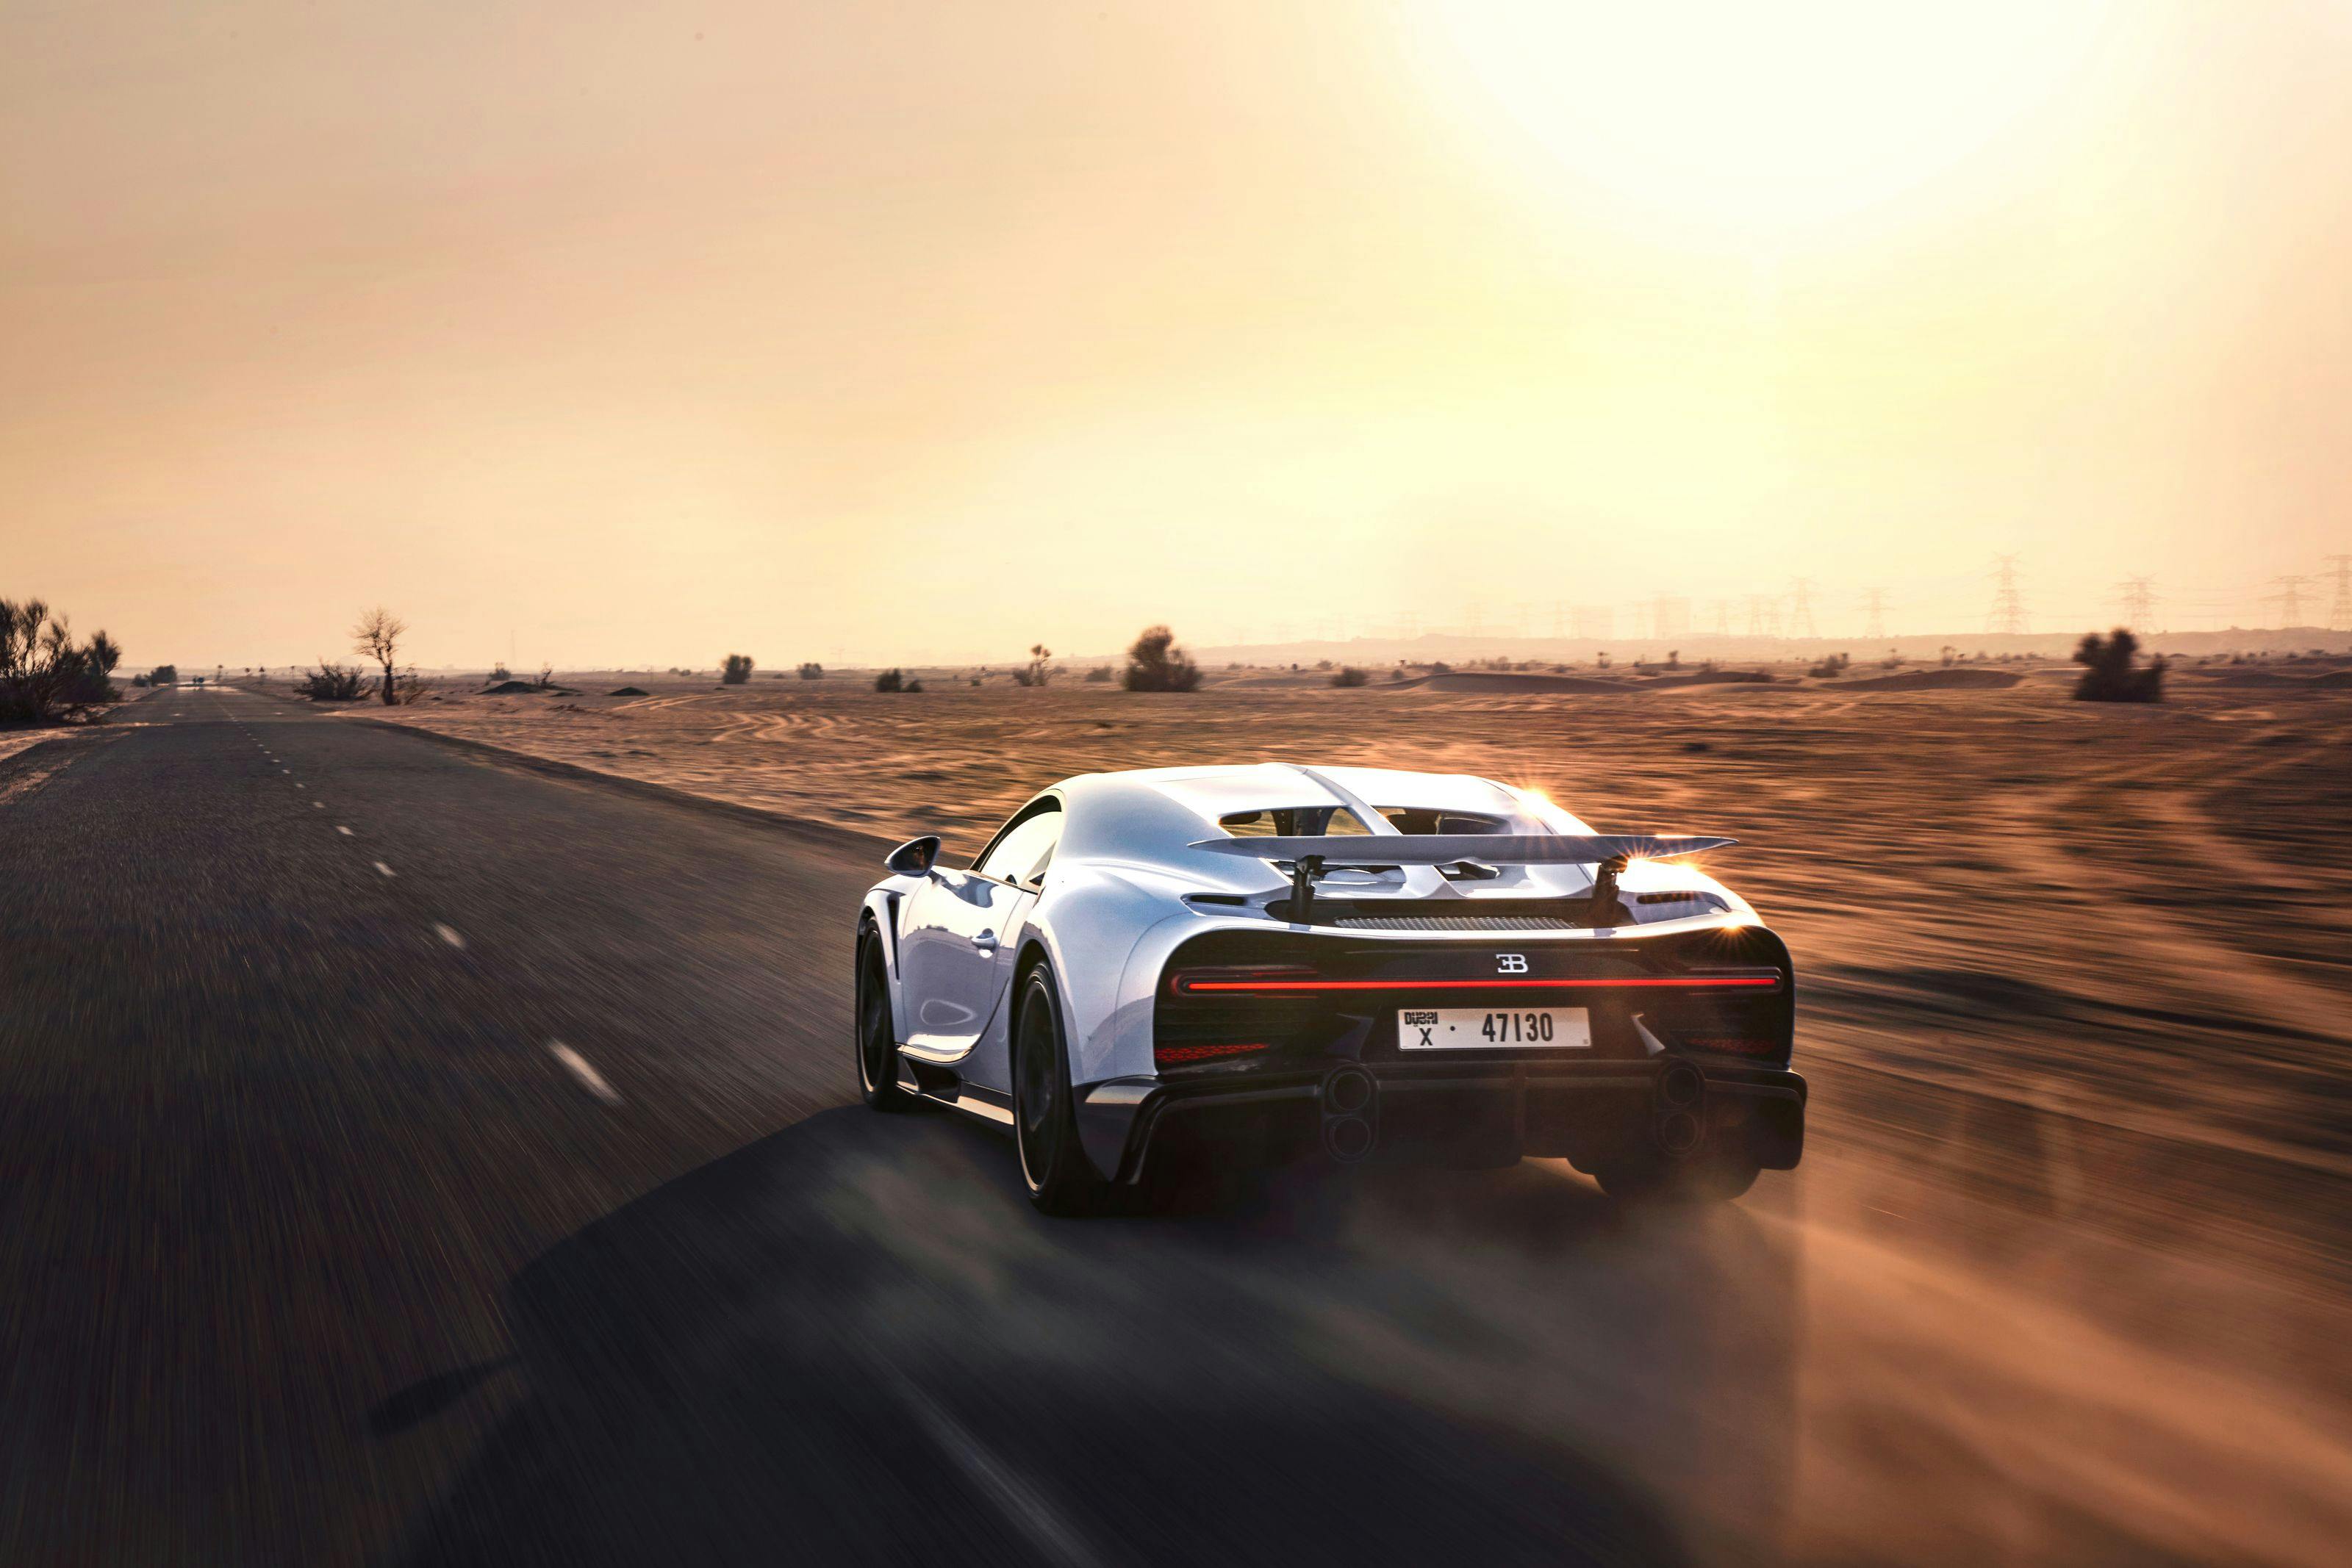 Bugatti Chiron Super Sport Makes its First Stop in the Middle East